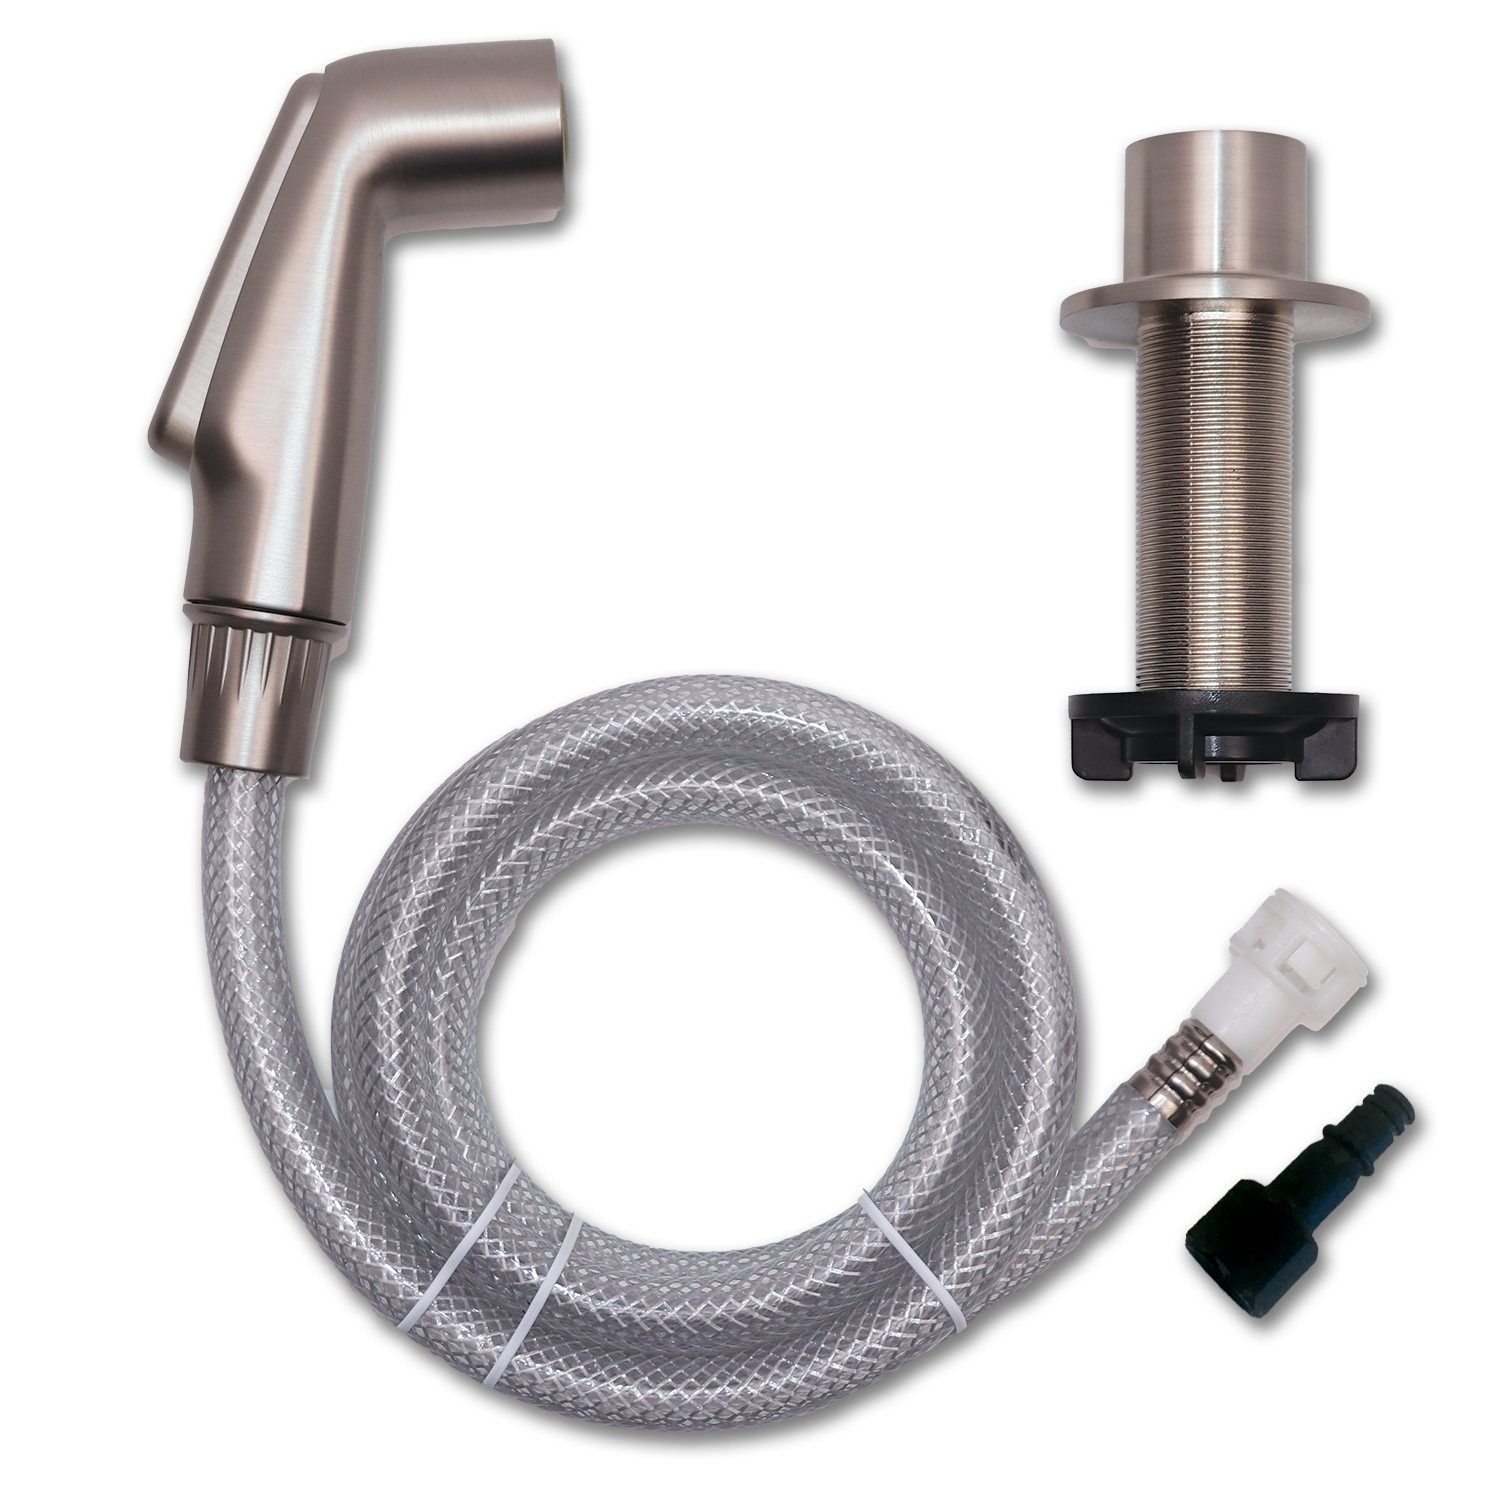 Chadwell Supply. WHITEFALLS KITCHEN FAUCET SPRAYER WITH HOSE - QUICK CONNECT- SATIN NICKEL